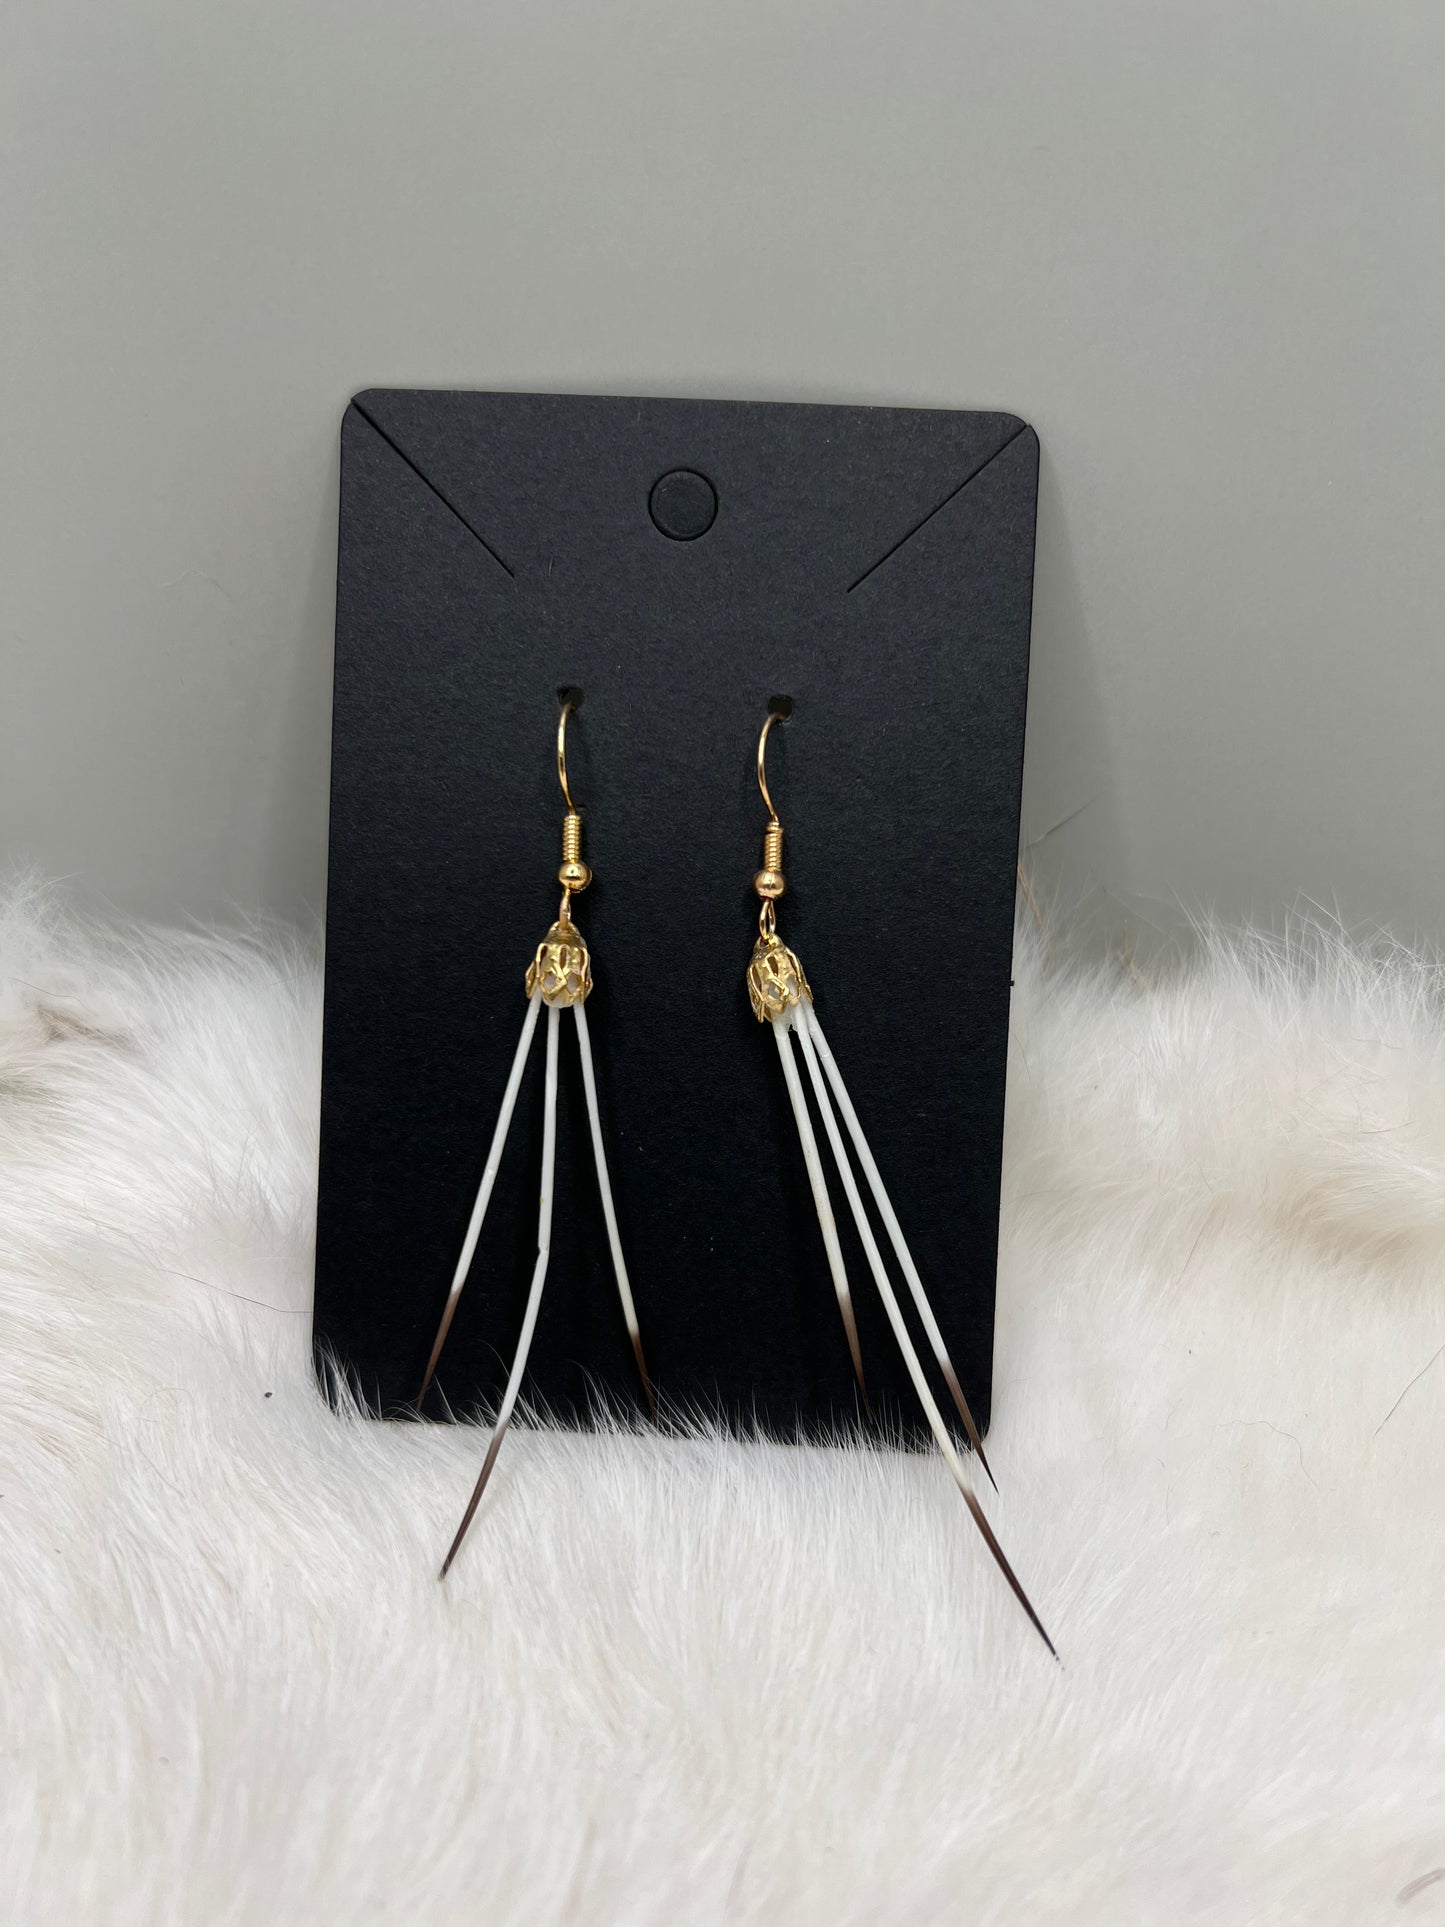 N. American Porcupine Quill Earrings - Gold